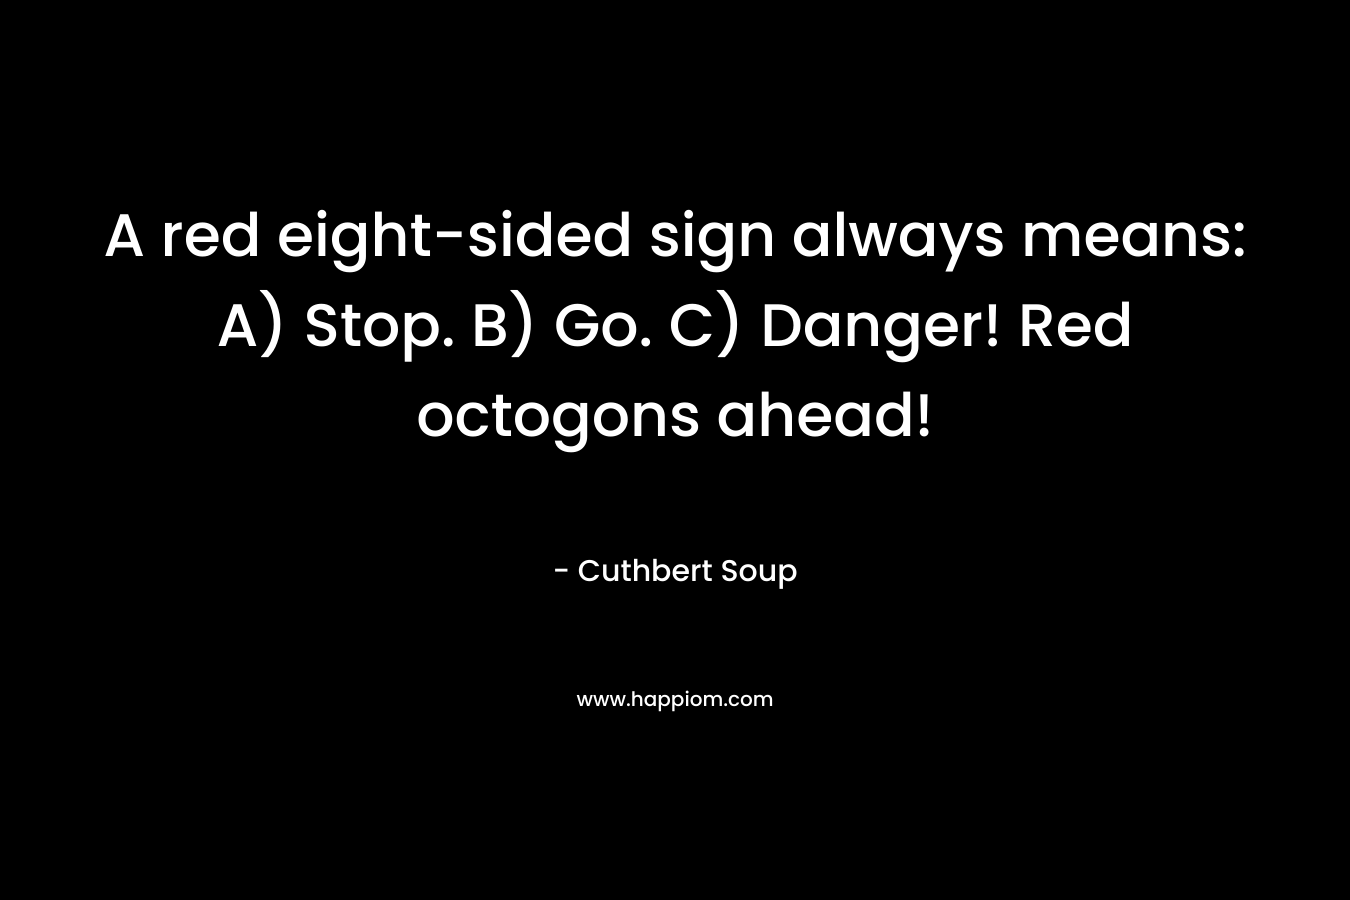 A red eight-sided sign always means: A) Stop. B) Go. C) Danger! Red octogons ahead! – Cuthbert Soup